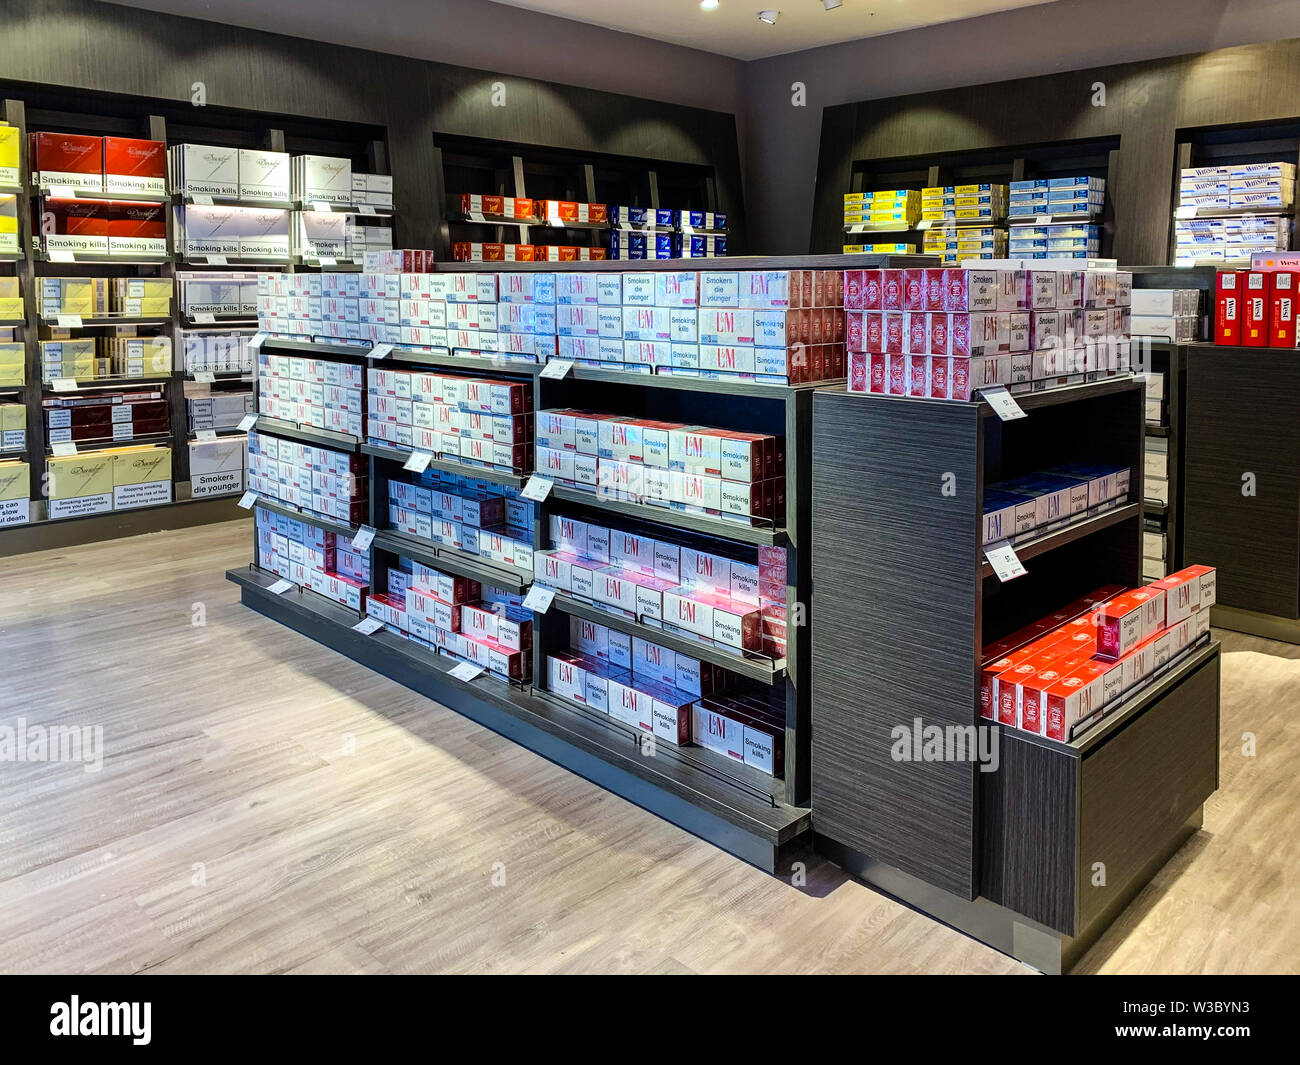 Cigarettes department at a duty free segment store with many pick packs on sale. Concept of duty free shops. Istanbul/ Turkey - April 2019 Stock Photo